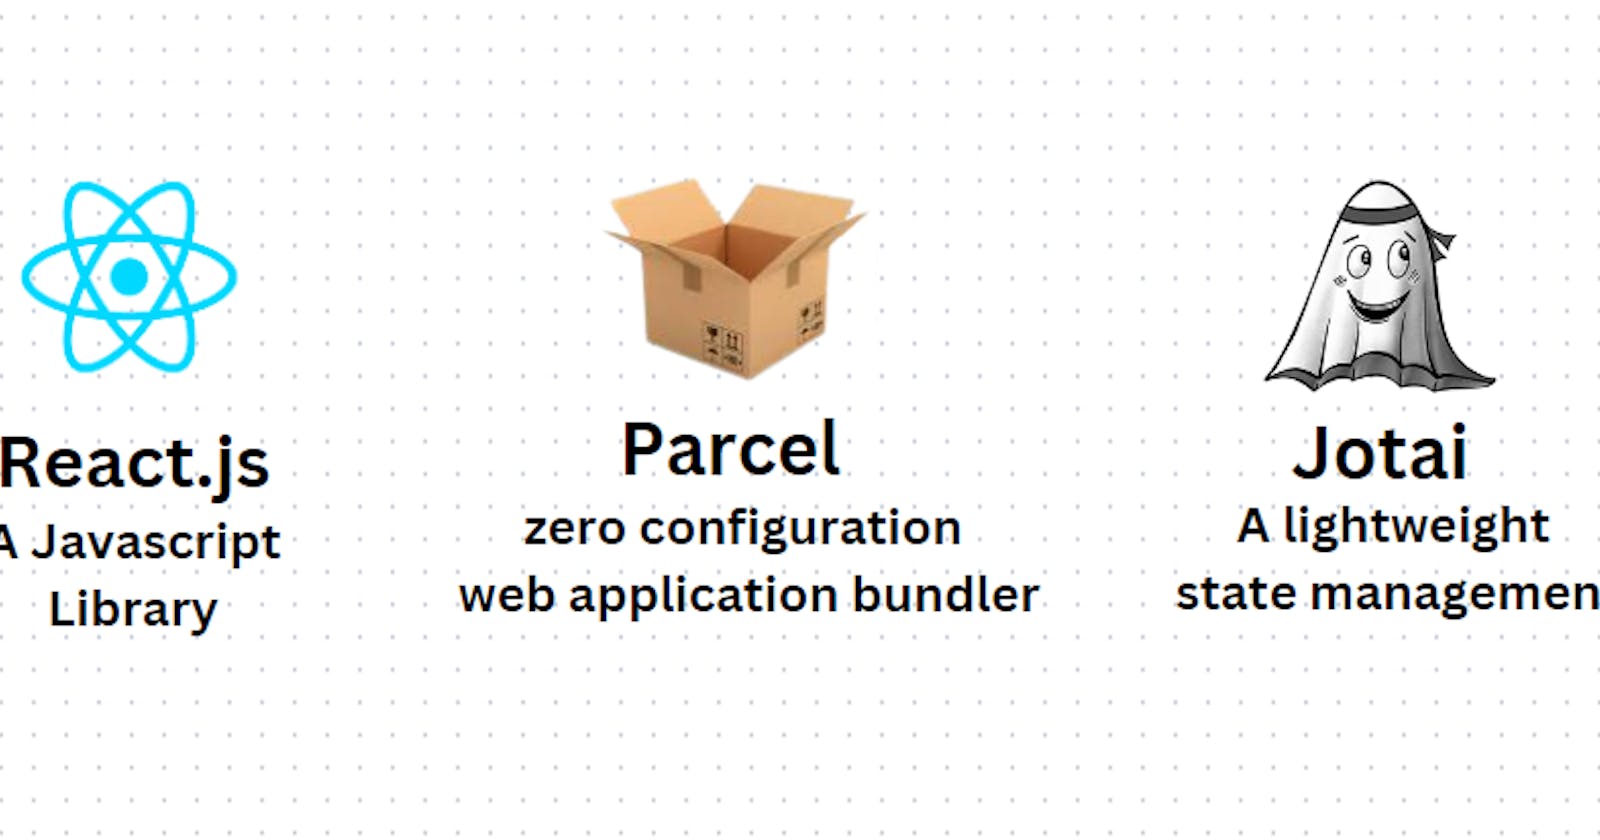 Create Raect app with Parcel and Jotai as a state management